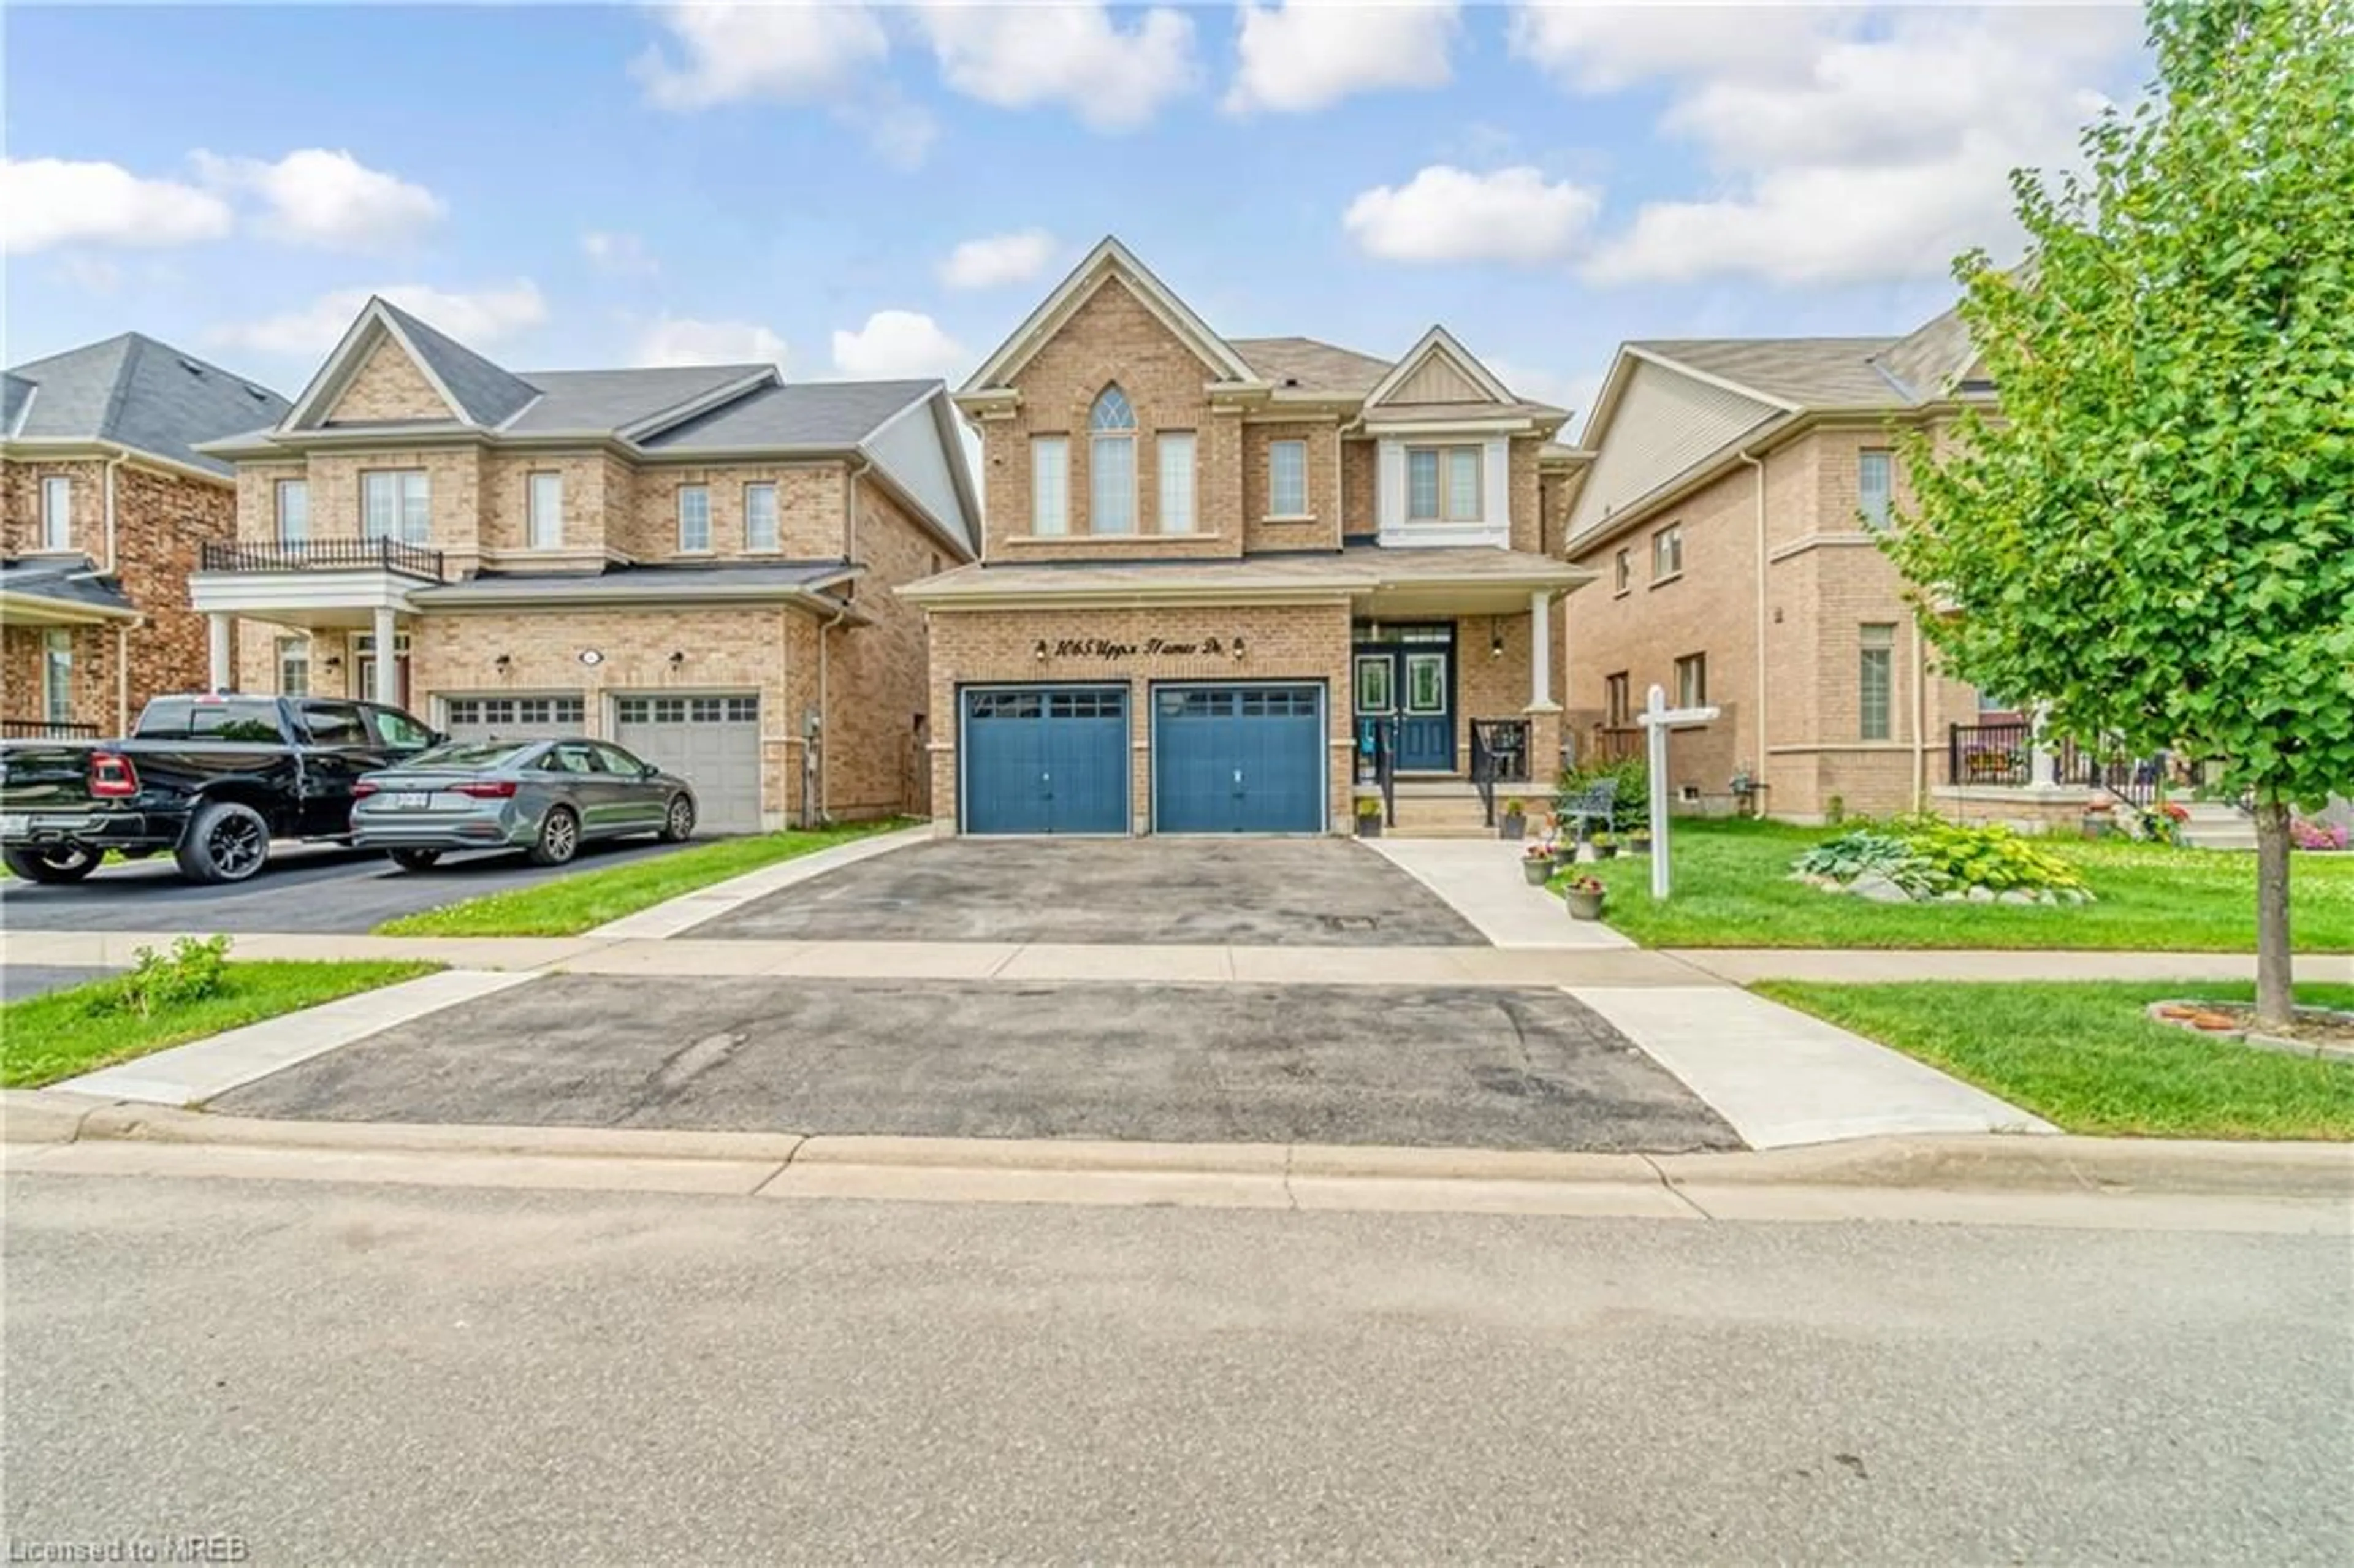 Frontside or backside of a home for 1065 Upper Thames Dr, Woodstock Ontario N4S 0A7